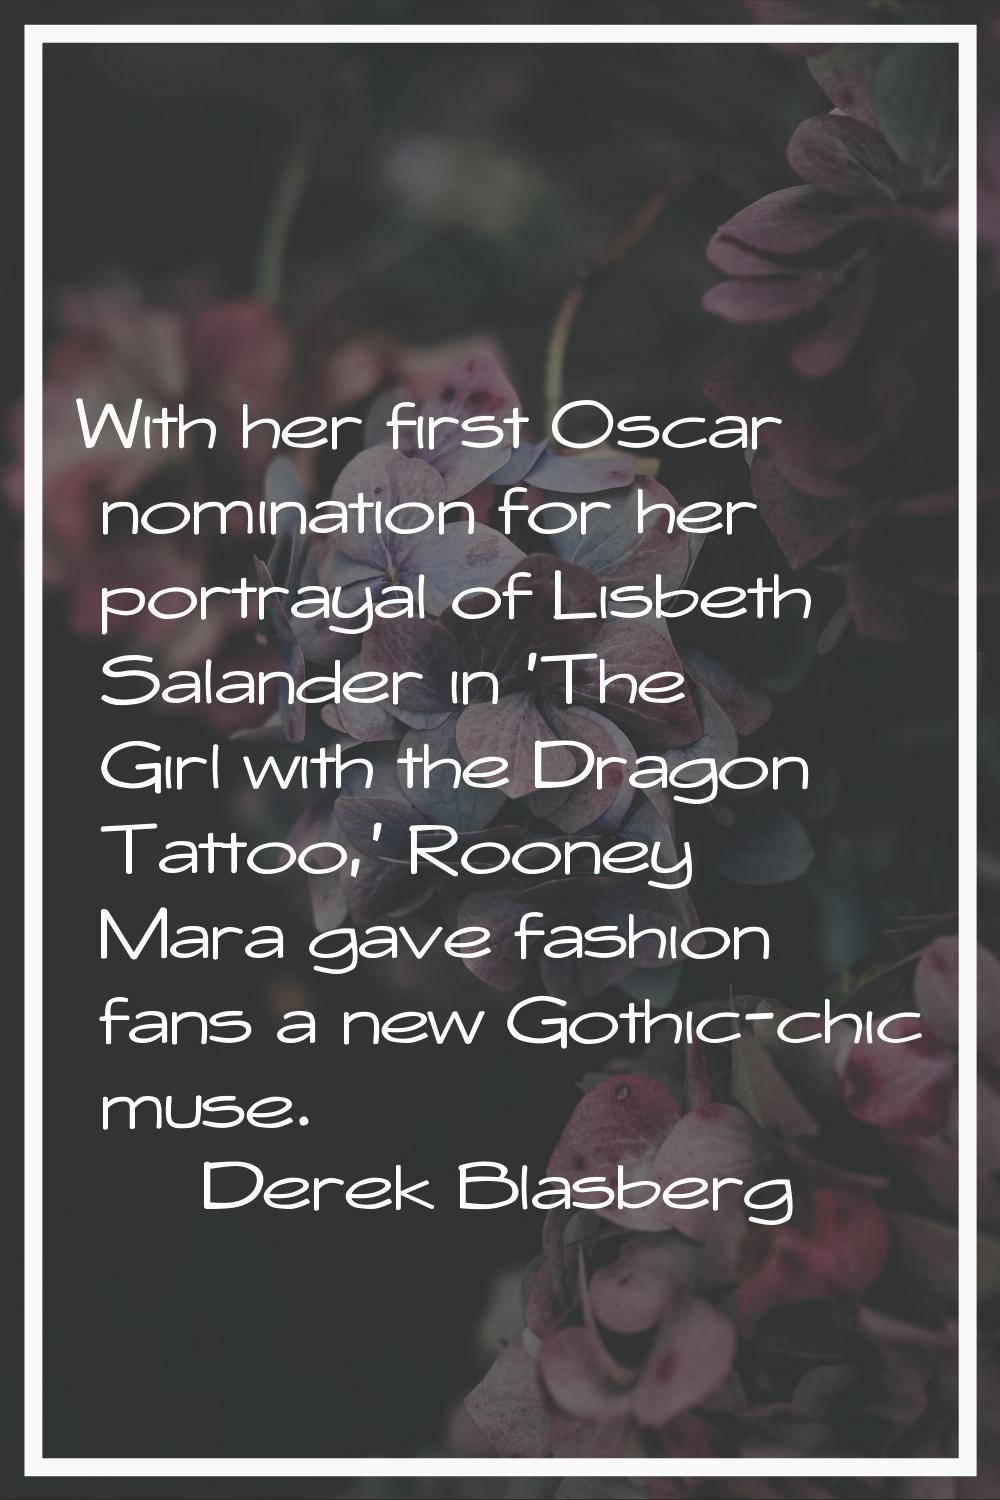 With her first Oscar nomination for her portrayal of Lisbeth Salander in 'The Girl with the Dragon 